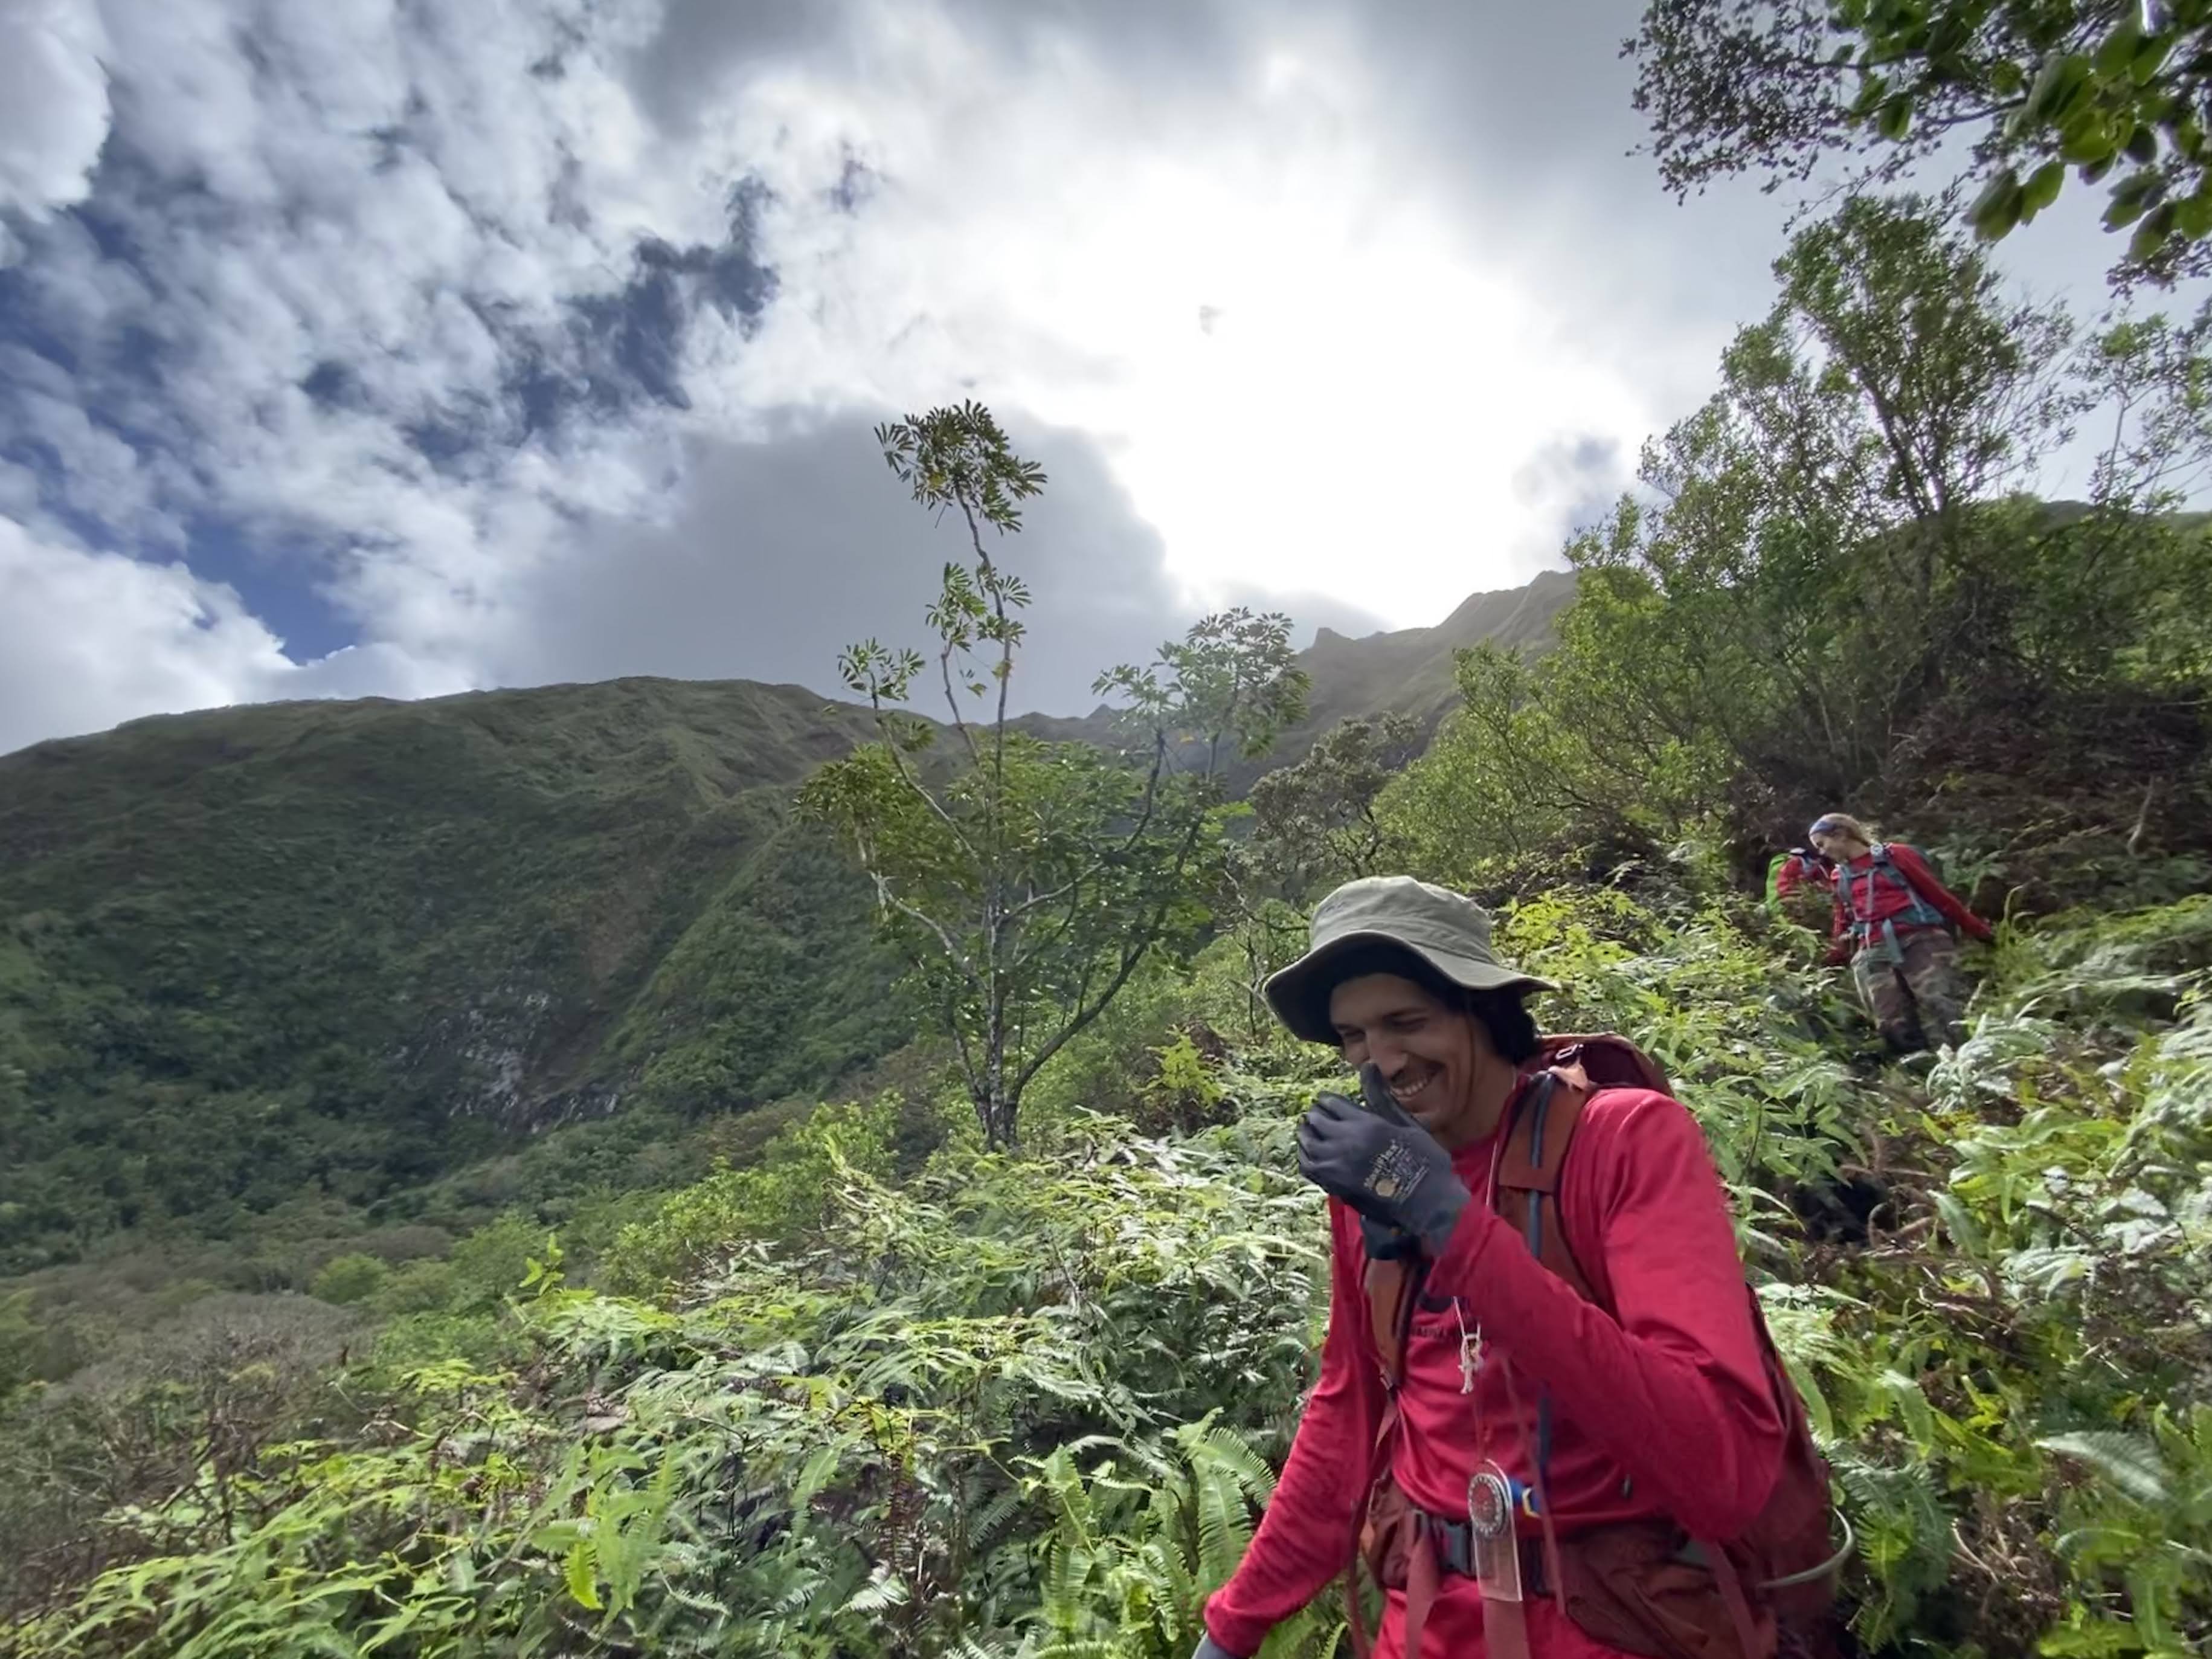 My coworker at the Oahu Invasive Species Committee laughing as the field crew makes our way down a ridgeline after a hard day’s work bushwacking through the dense uluhe plants that cover the lower elevation ridges in the Ko’olau Mountains.